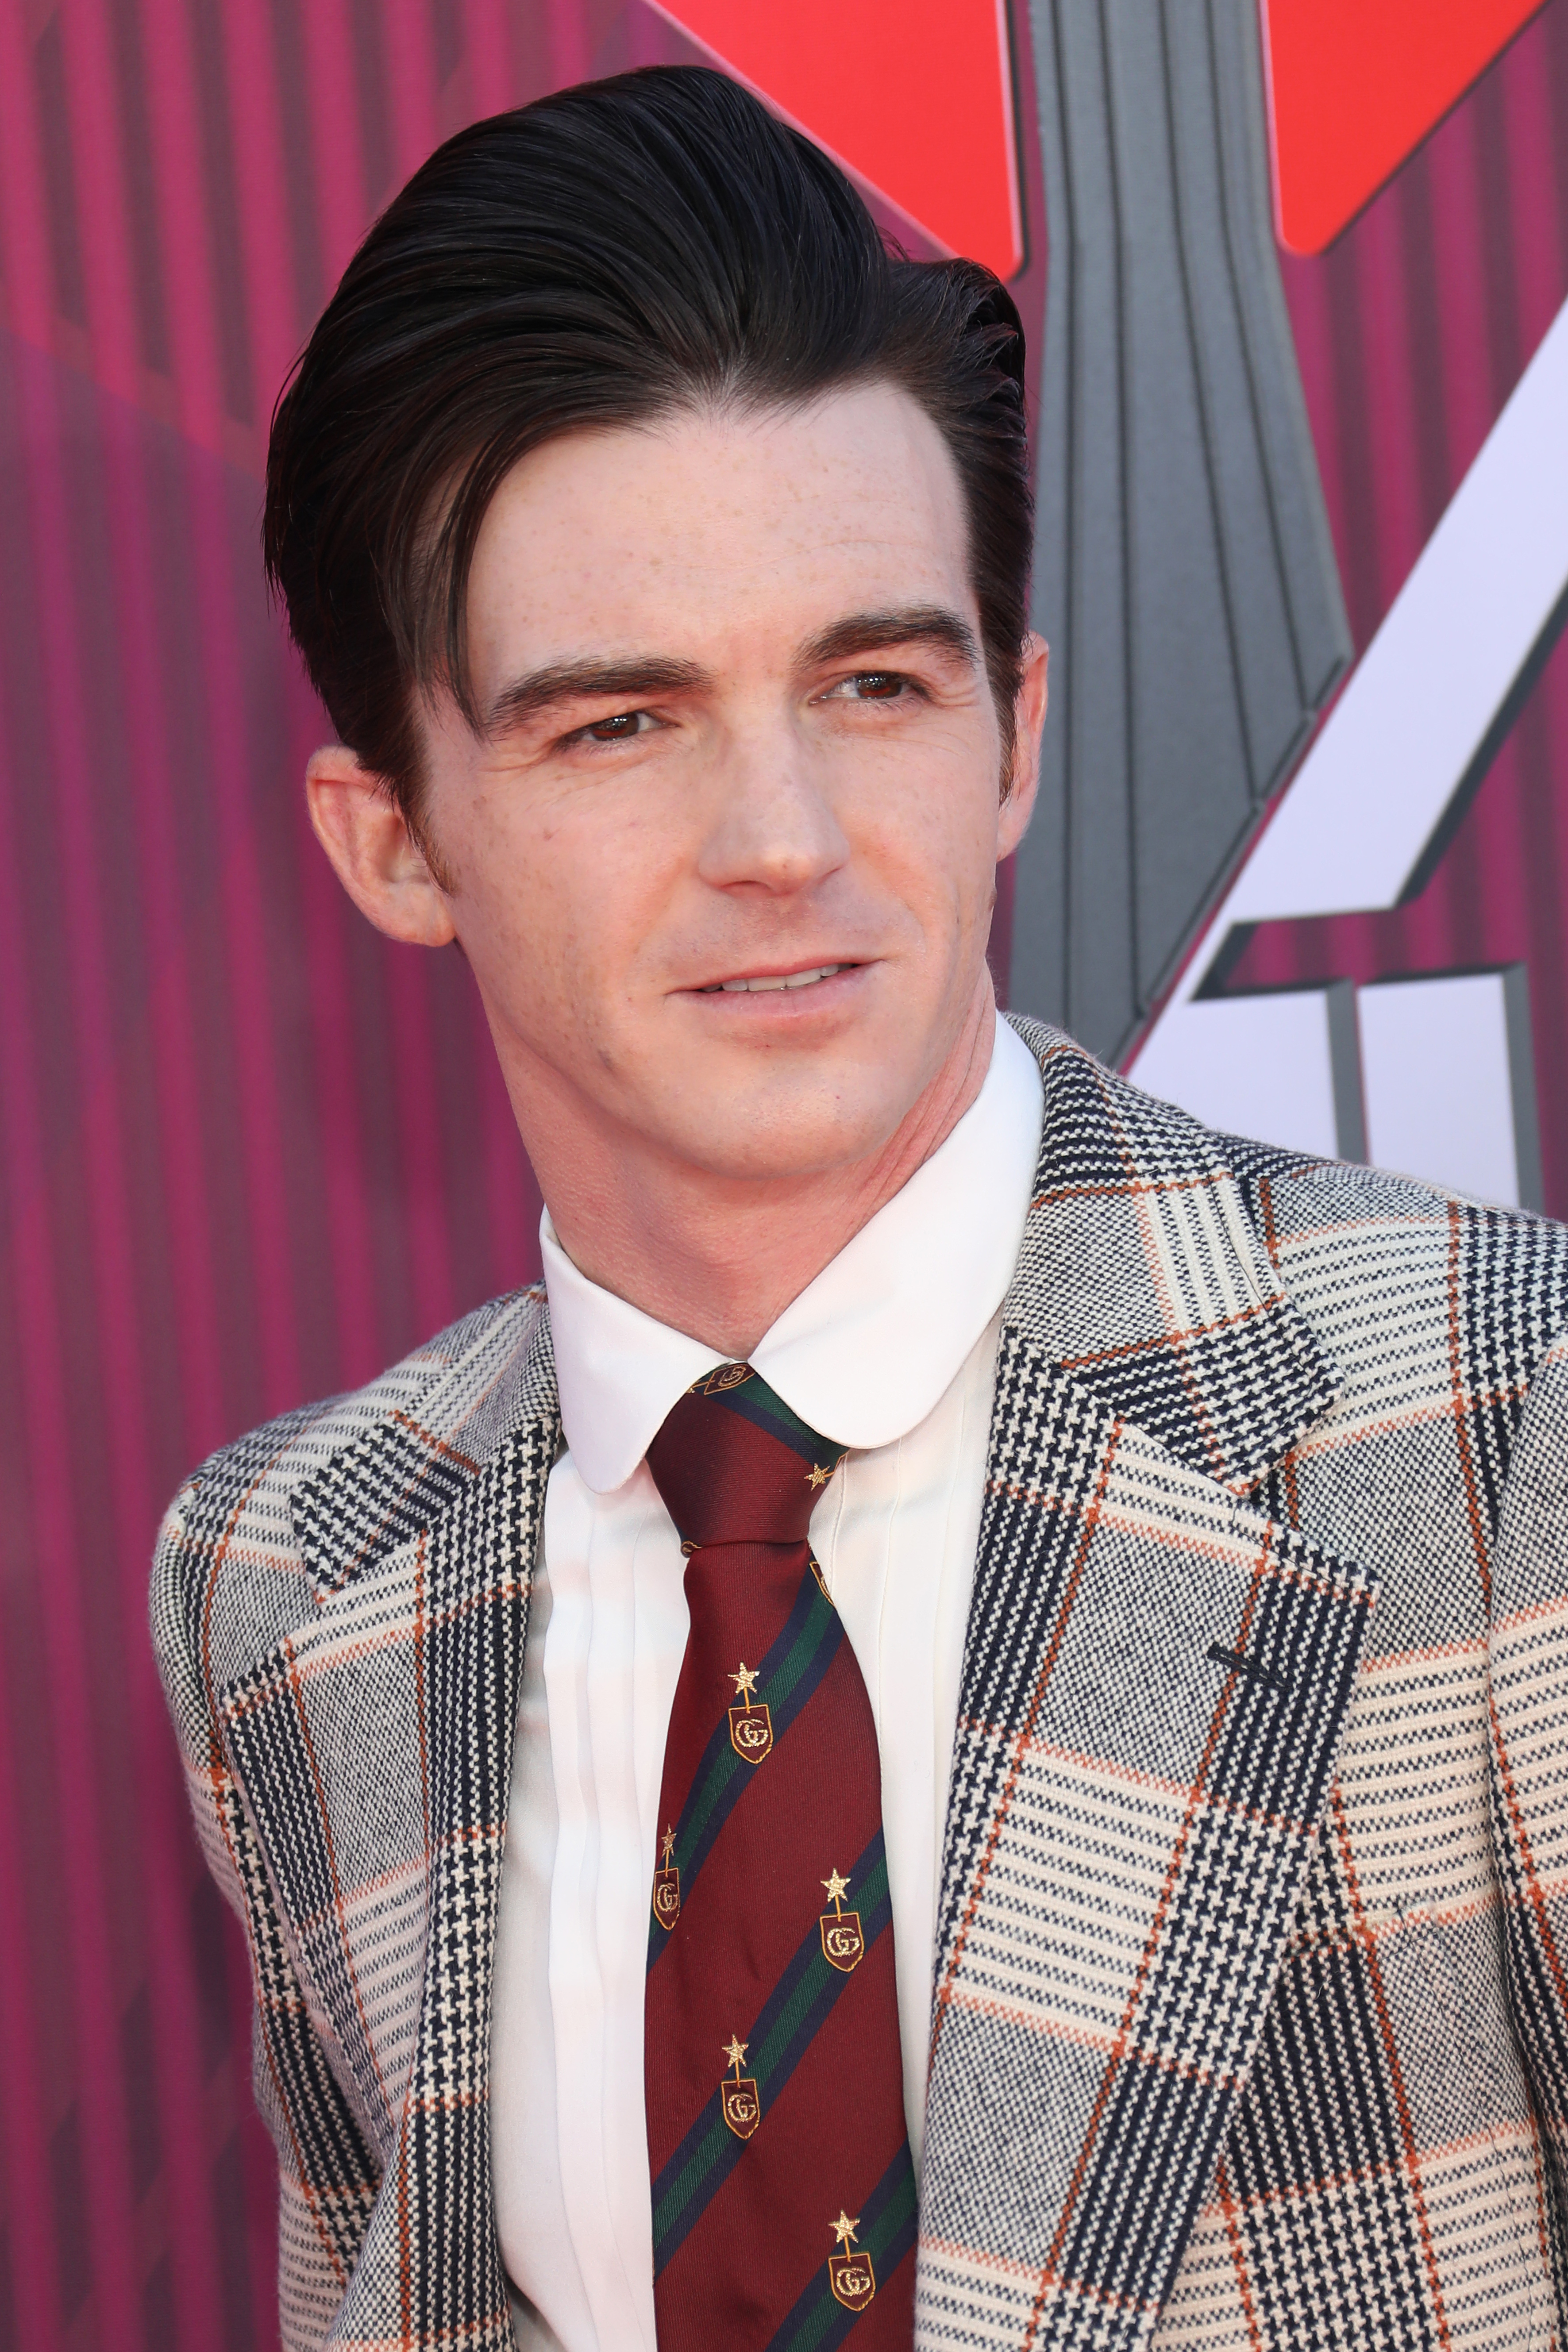 Drake Bell at an event, wearing a plaid suit with a striped tie and a collared shirt